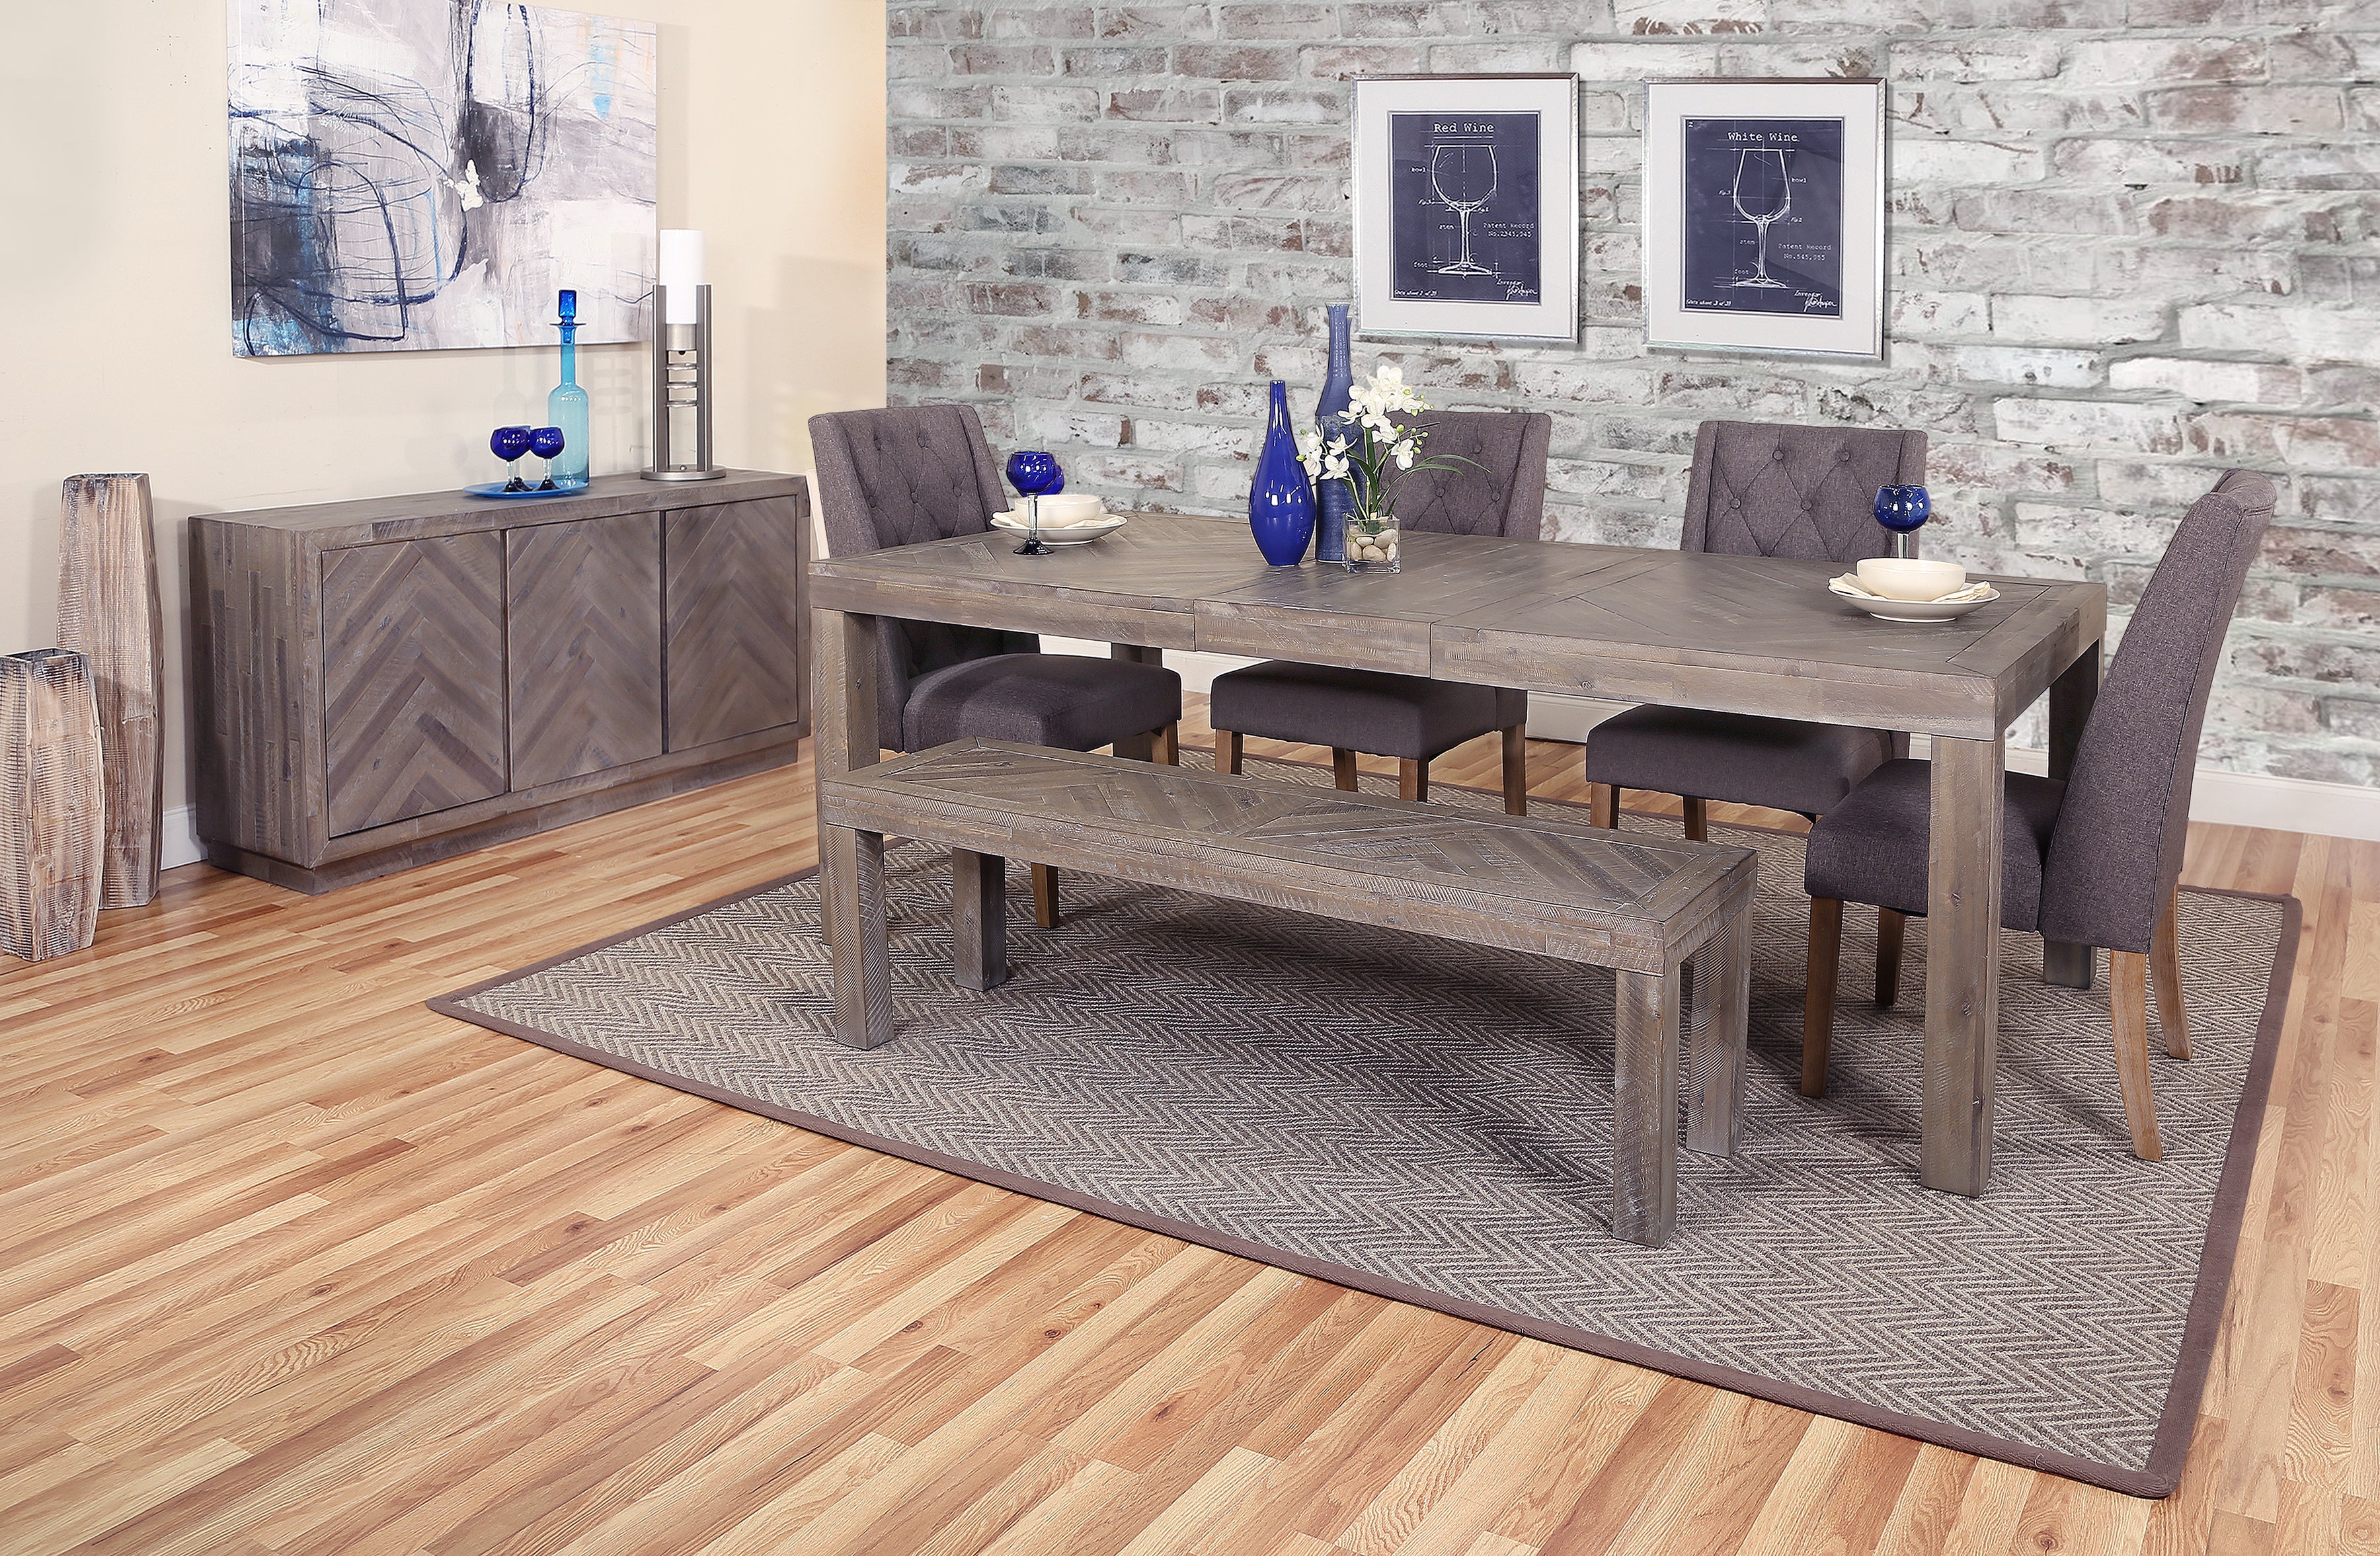 Kanes 5 Piece Wood Dining Room Sets